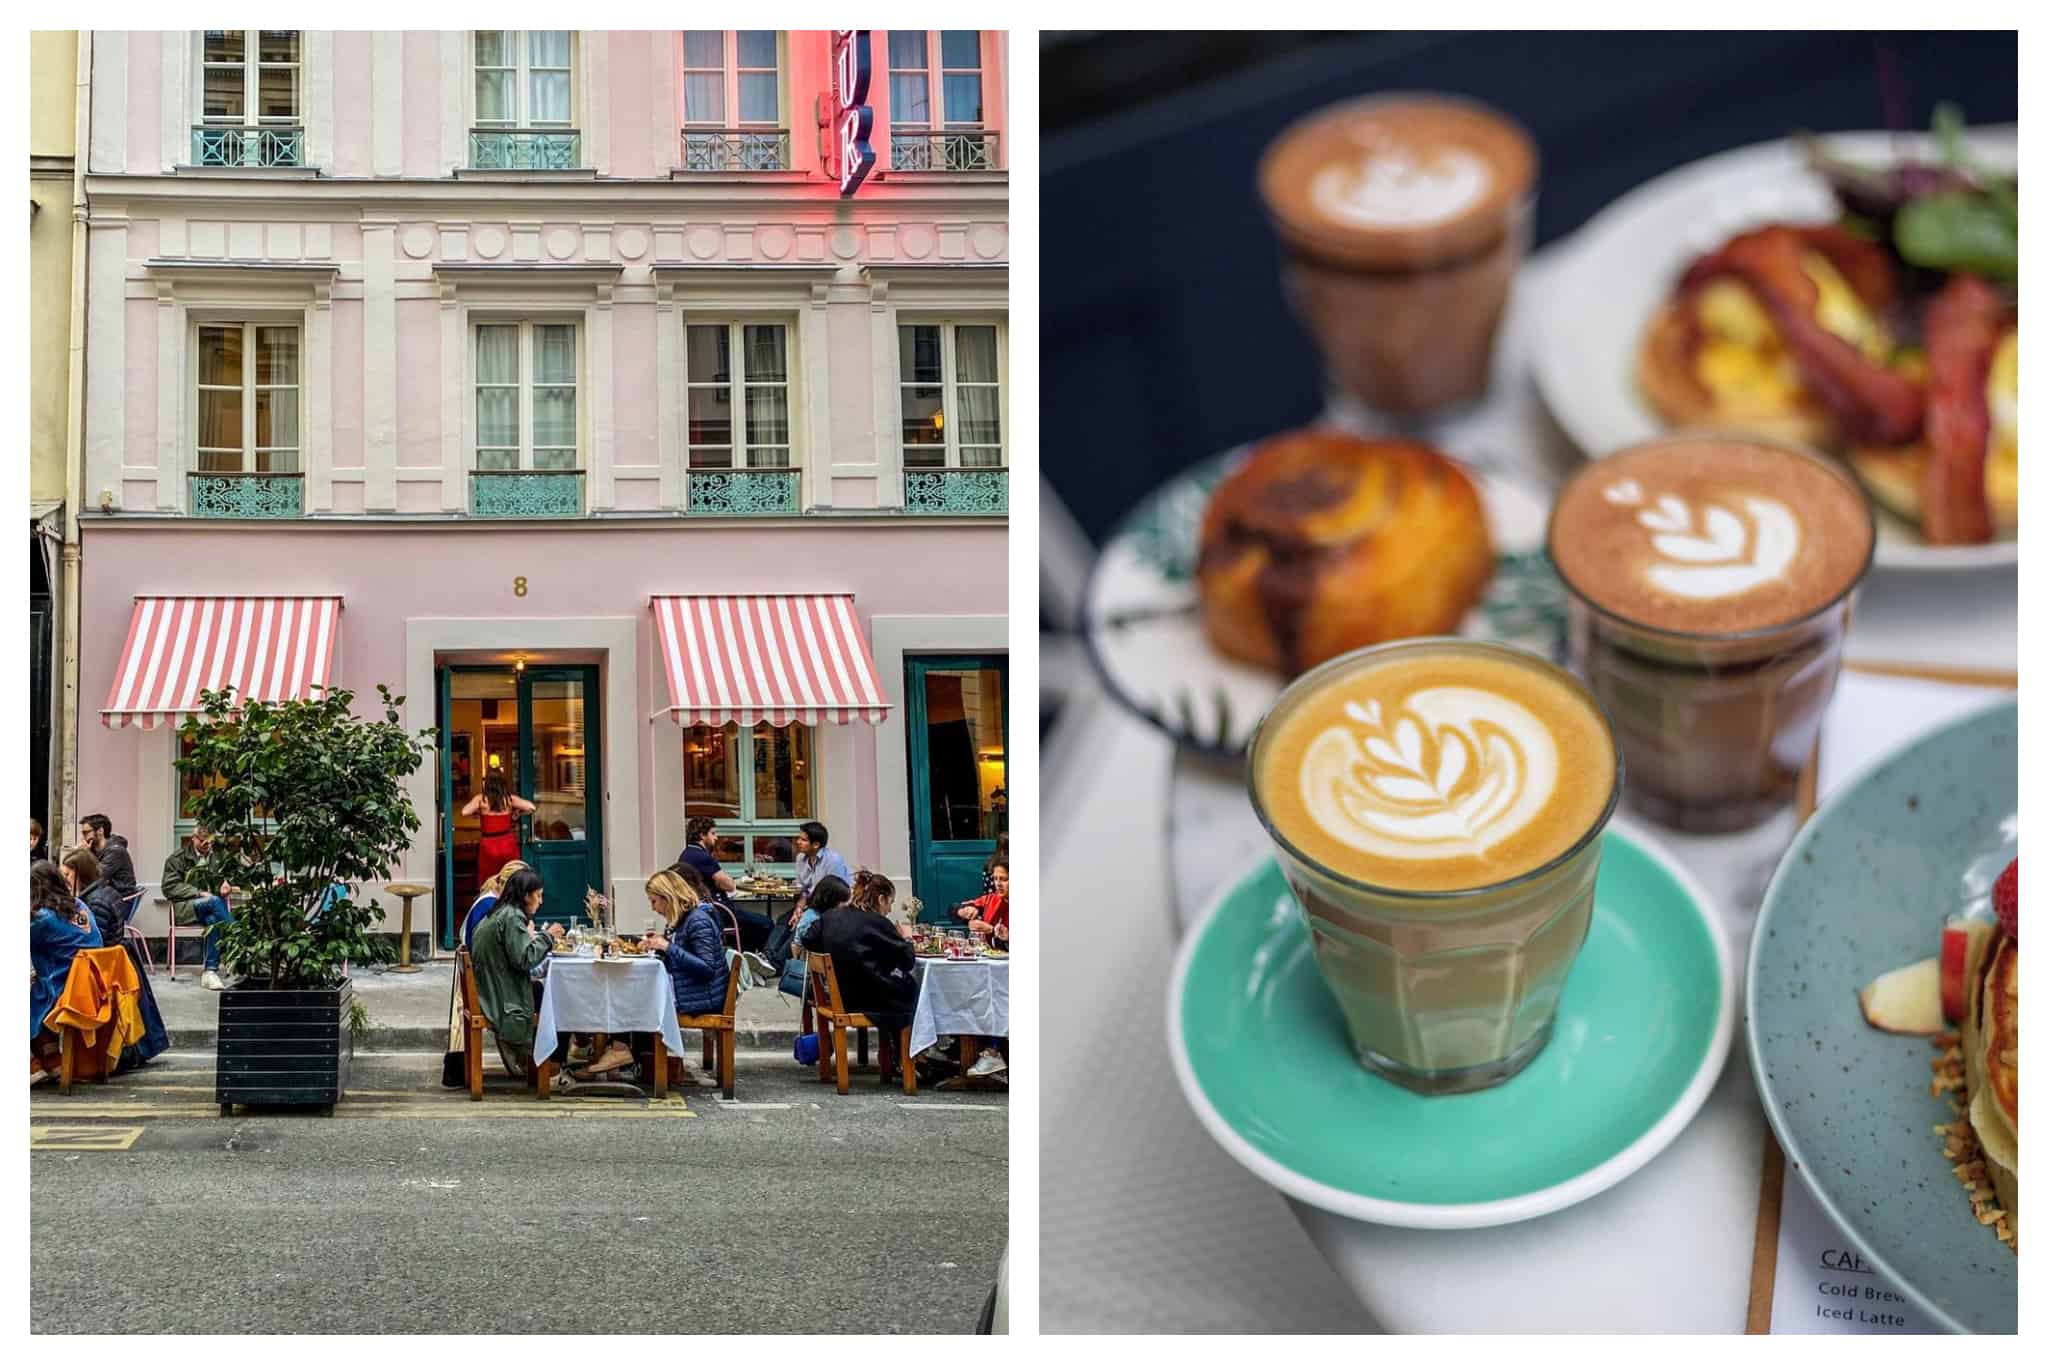 Left: Parisians are dining in a terrace of a café lined with pink and green details. Right: a close up of a brunch table filled with cups of cappuccinos with coffee art.